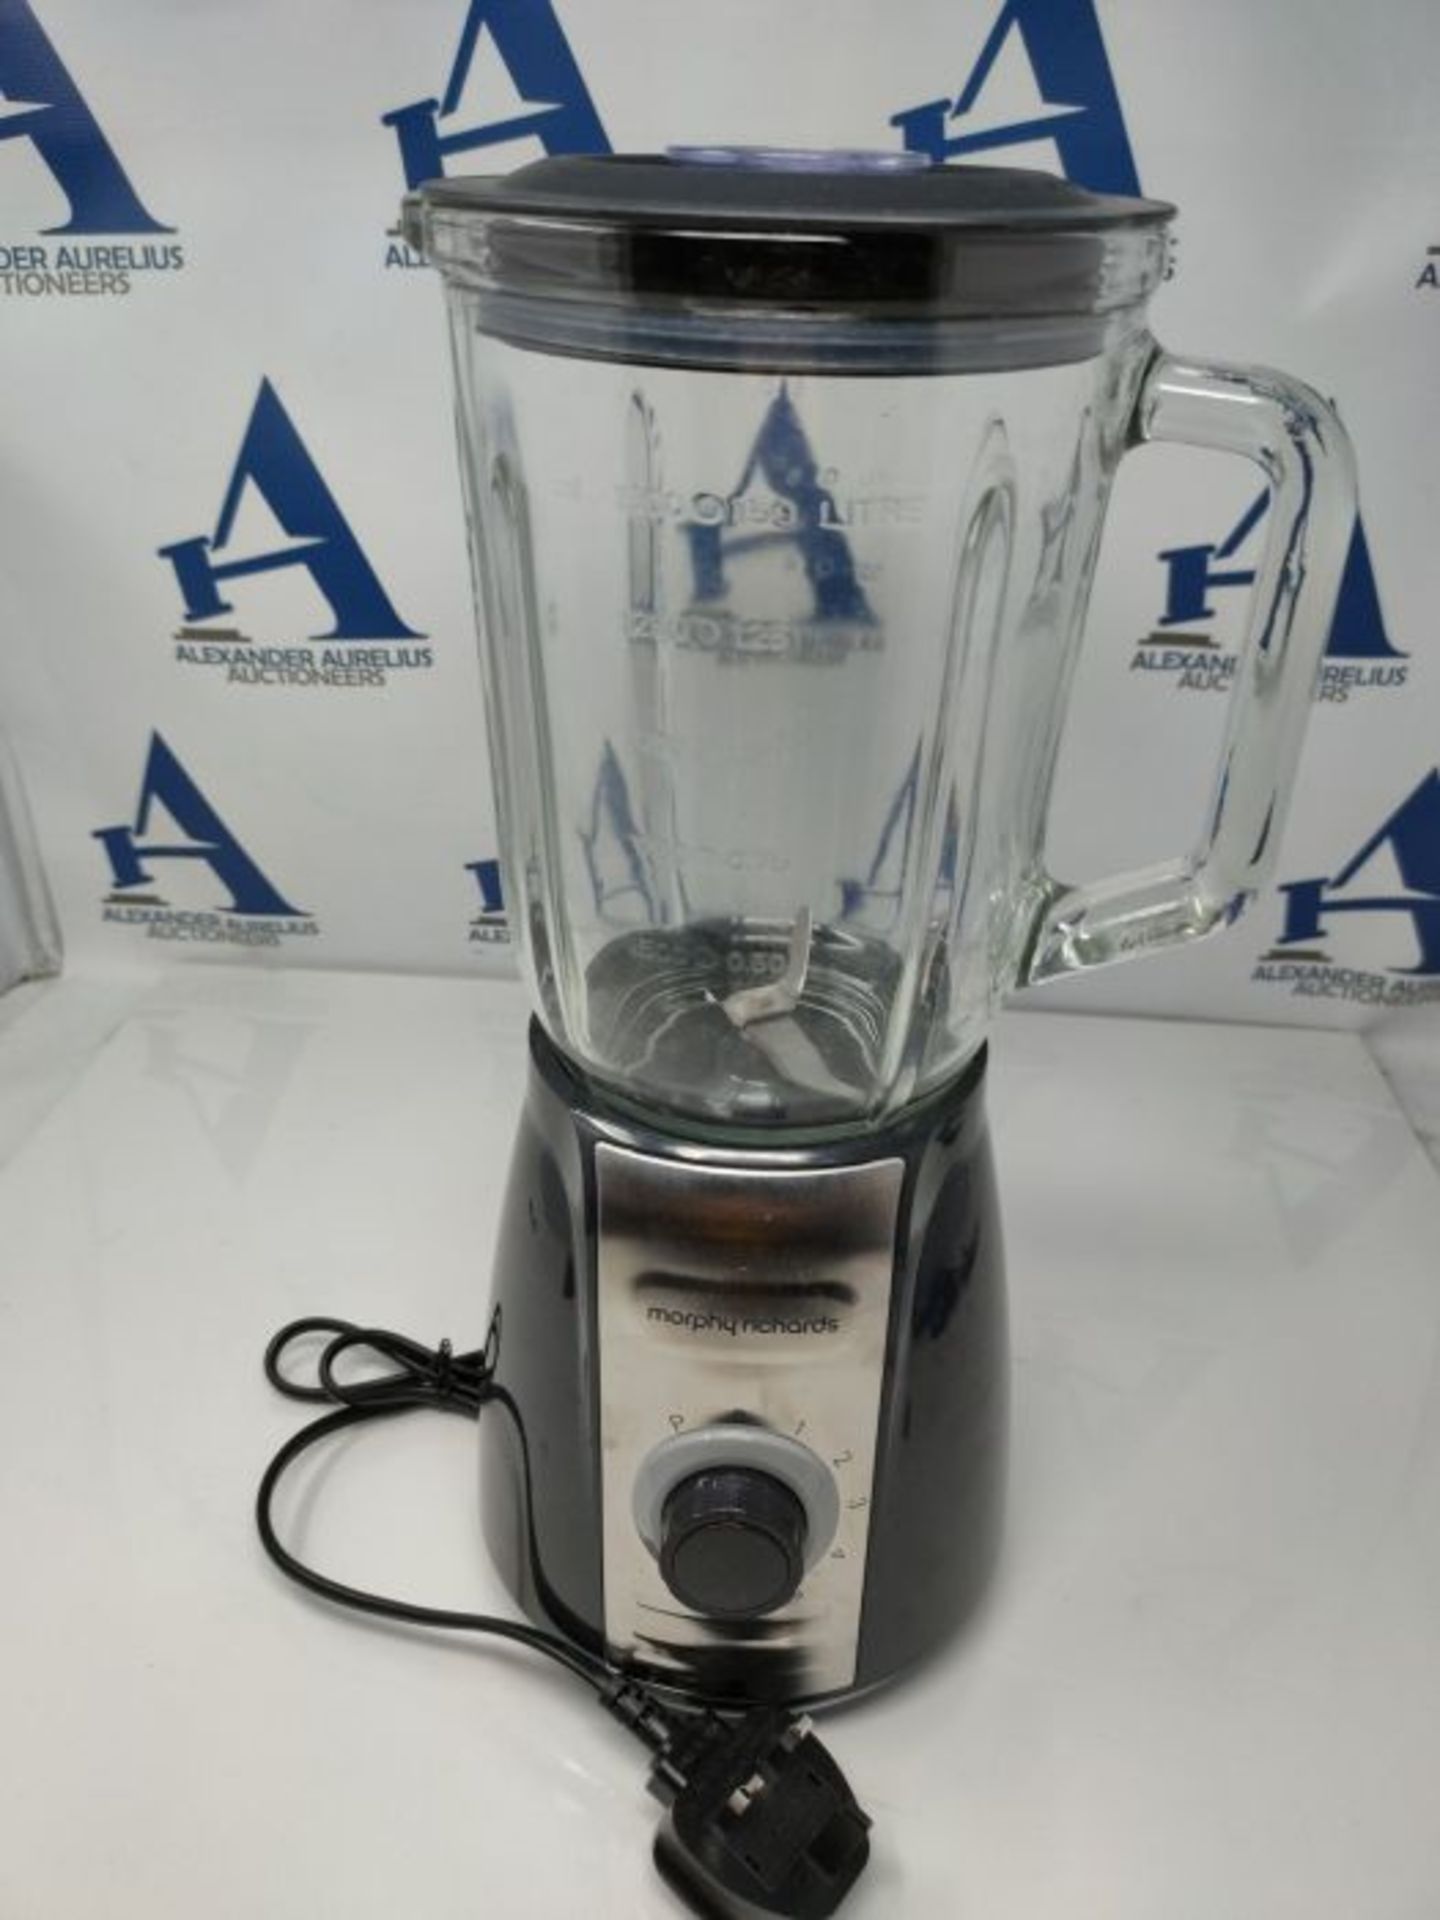 Morphy Richards 403010 Jug Blender with Ice Crusher Blades Inspire Kitchen Confidence, - Image 3 of 3